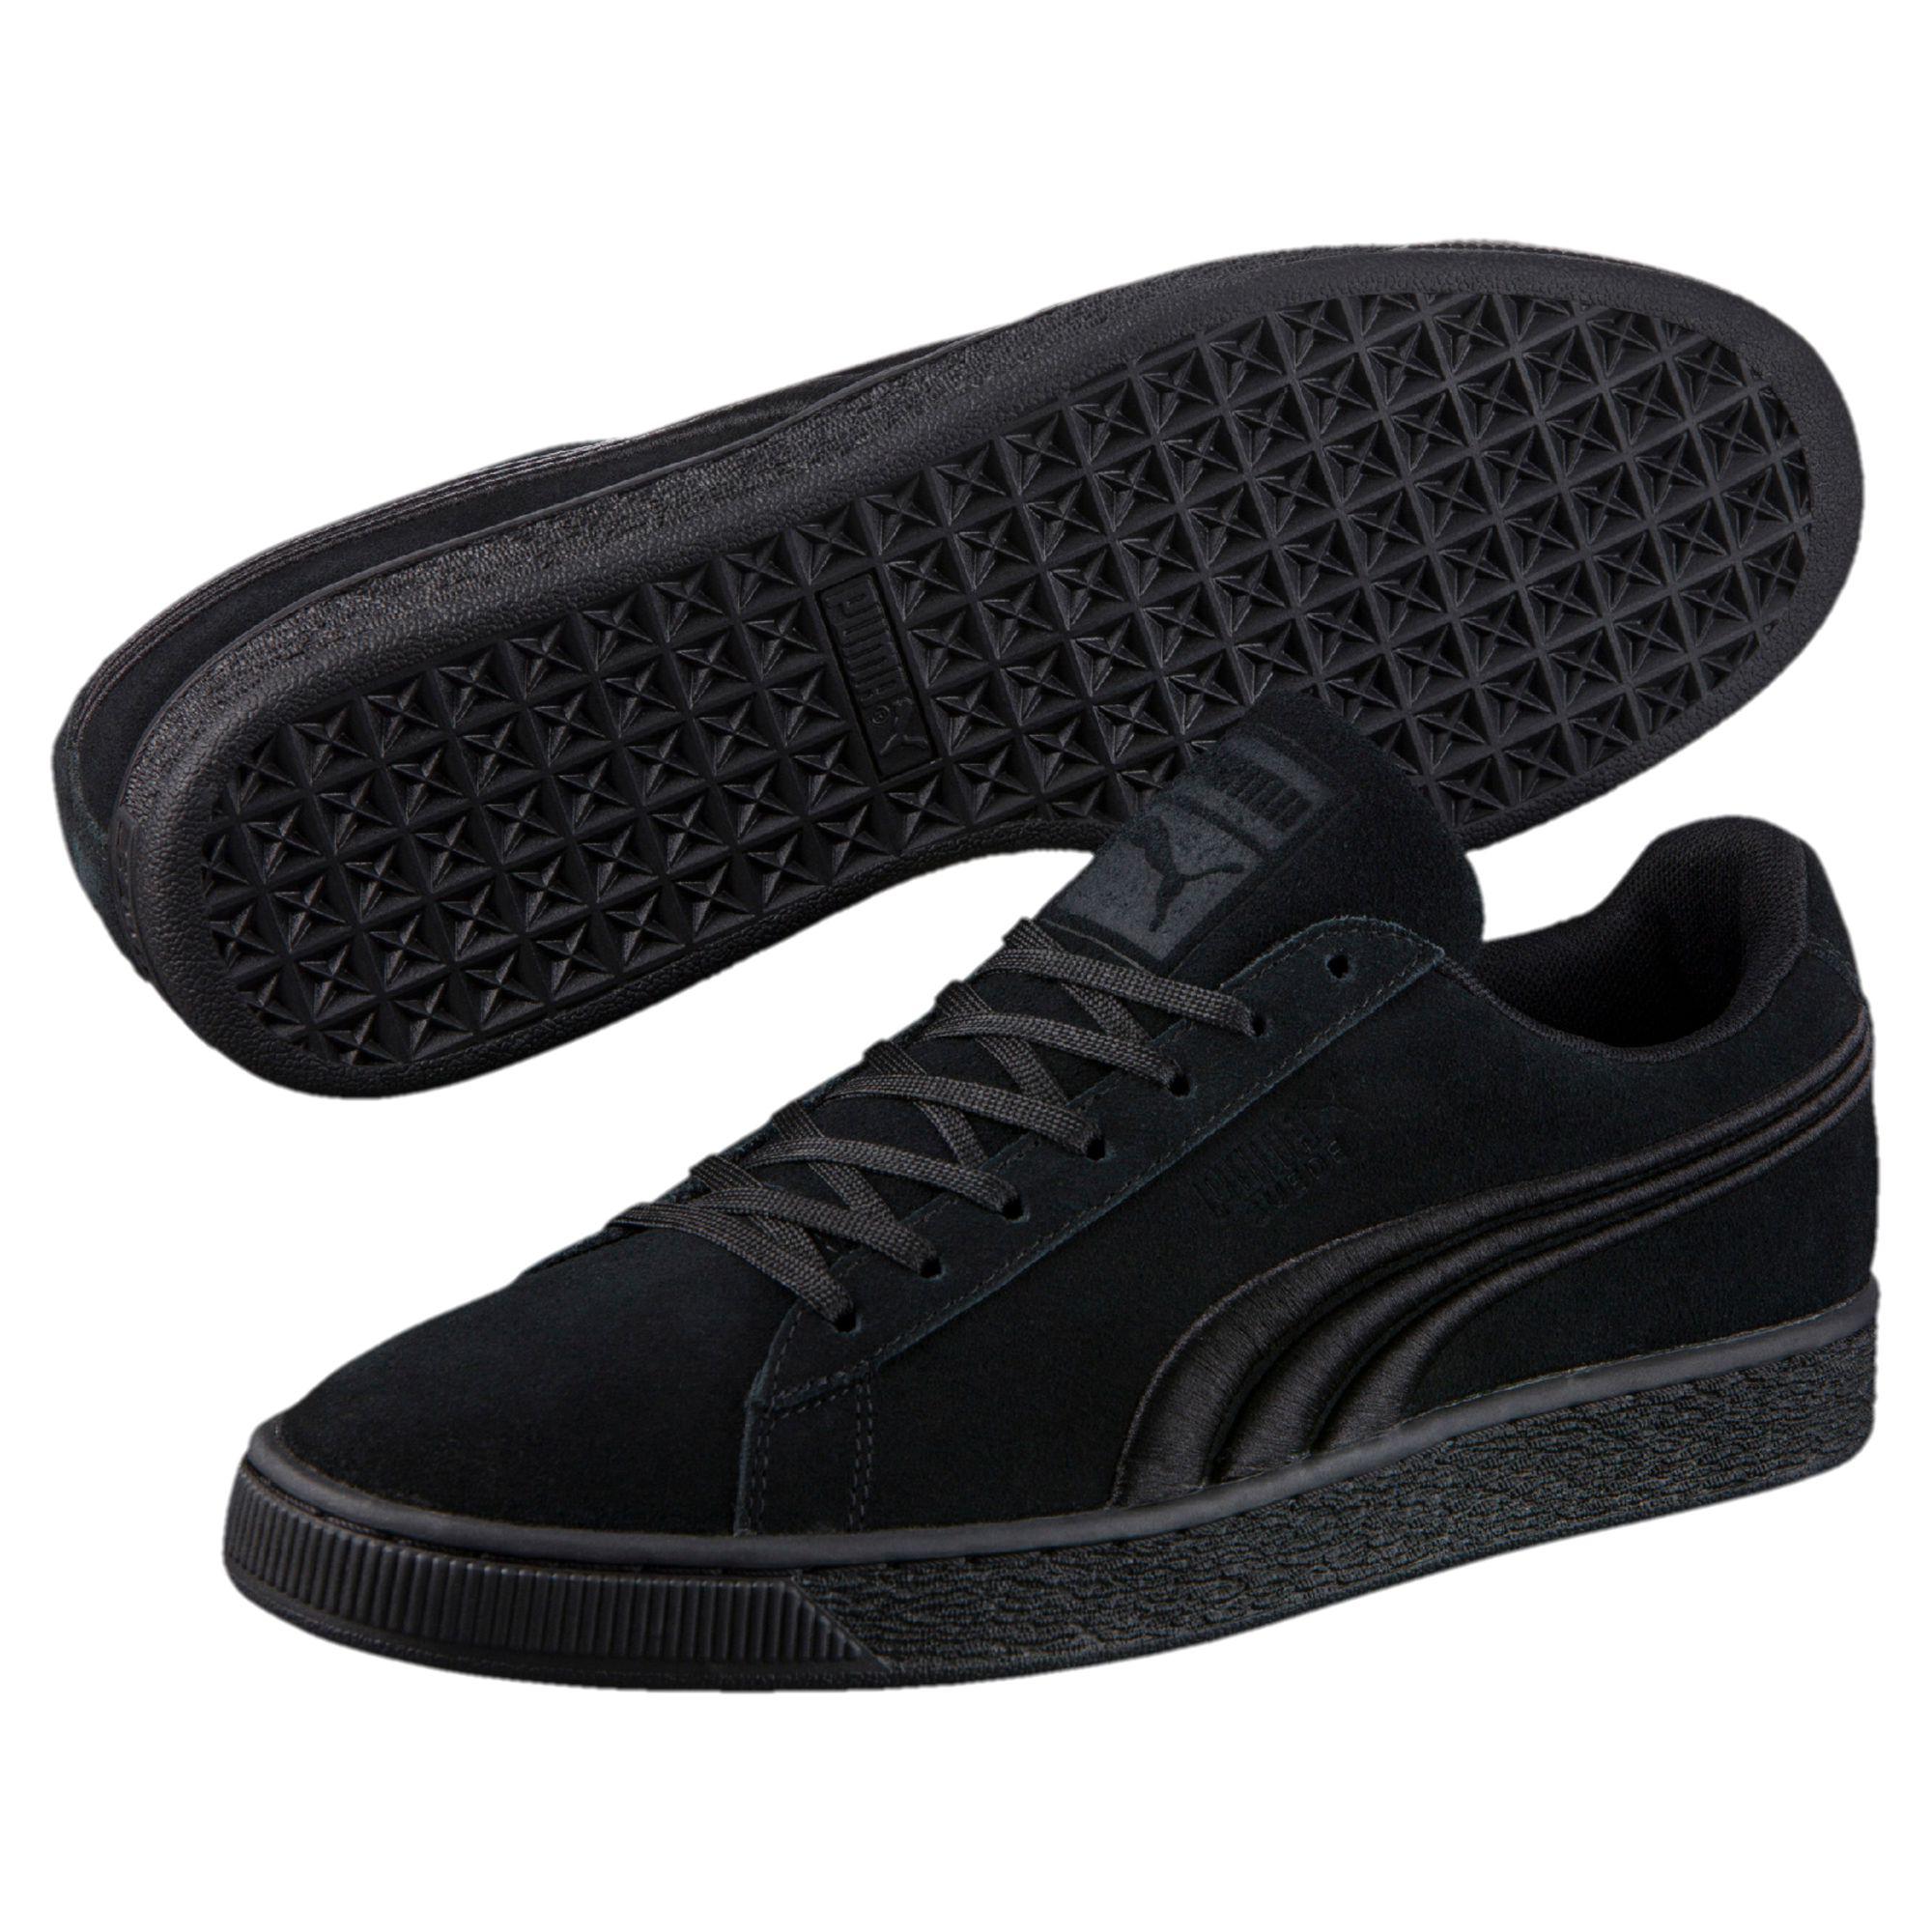 PUMA Suede Classic Badge Sneakers in Black for Men - Lyst